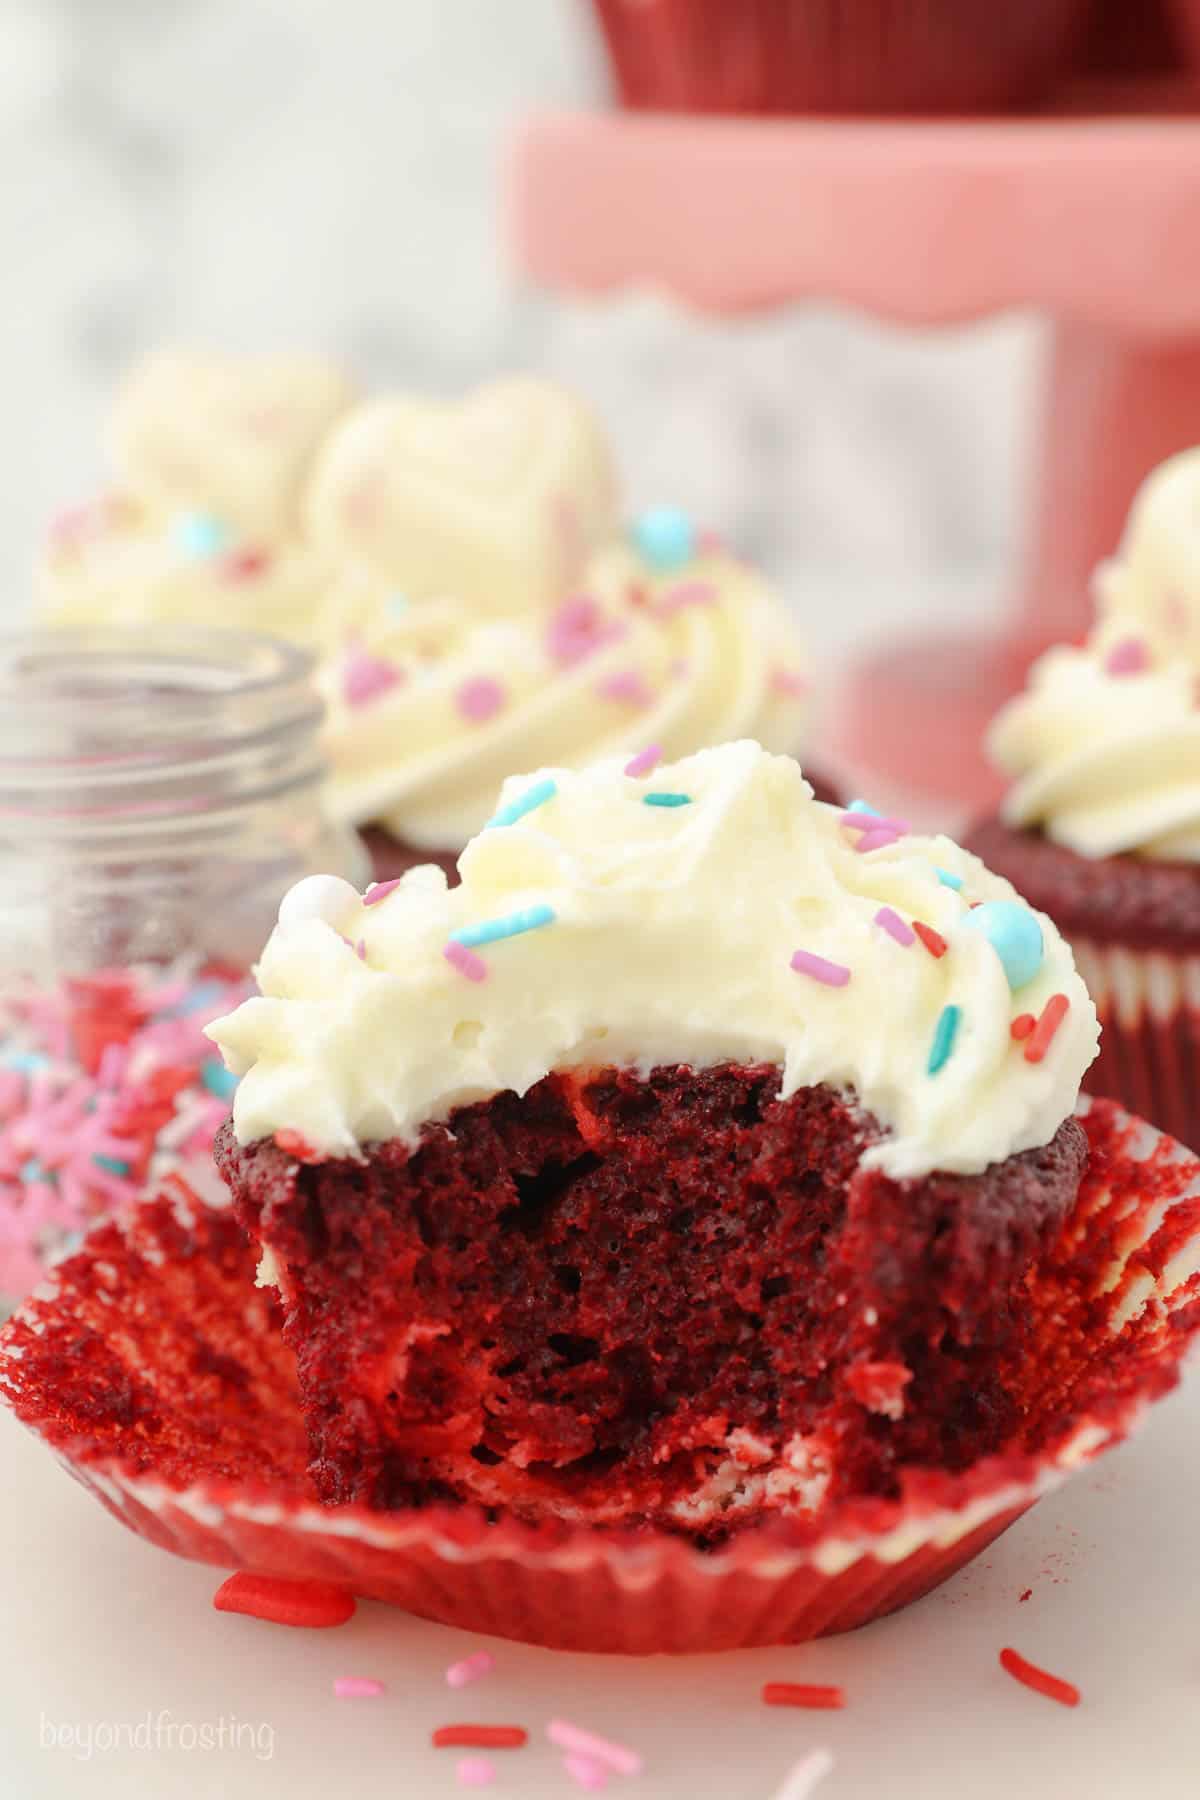 A Red velvet cupcake with a bite taken out of it